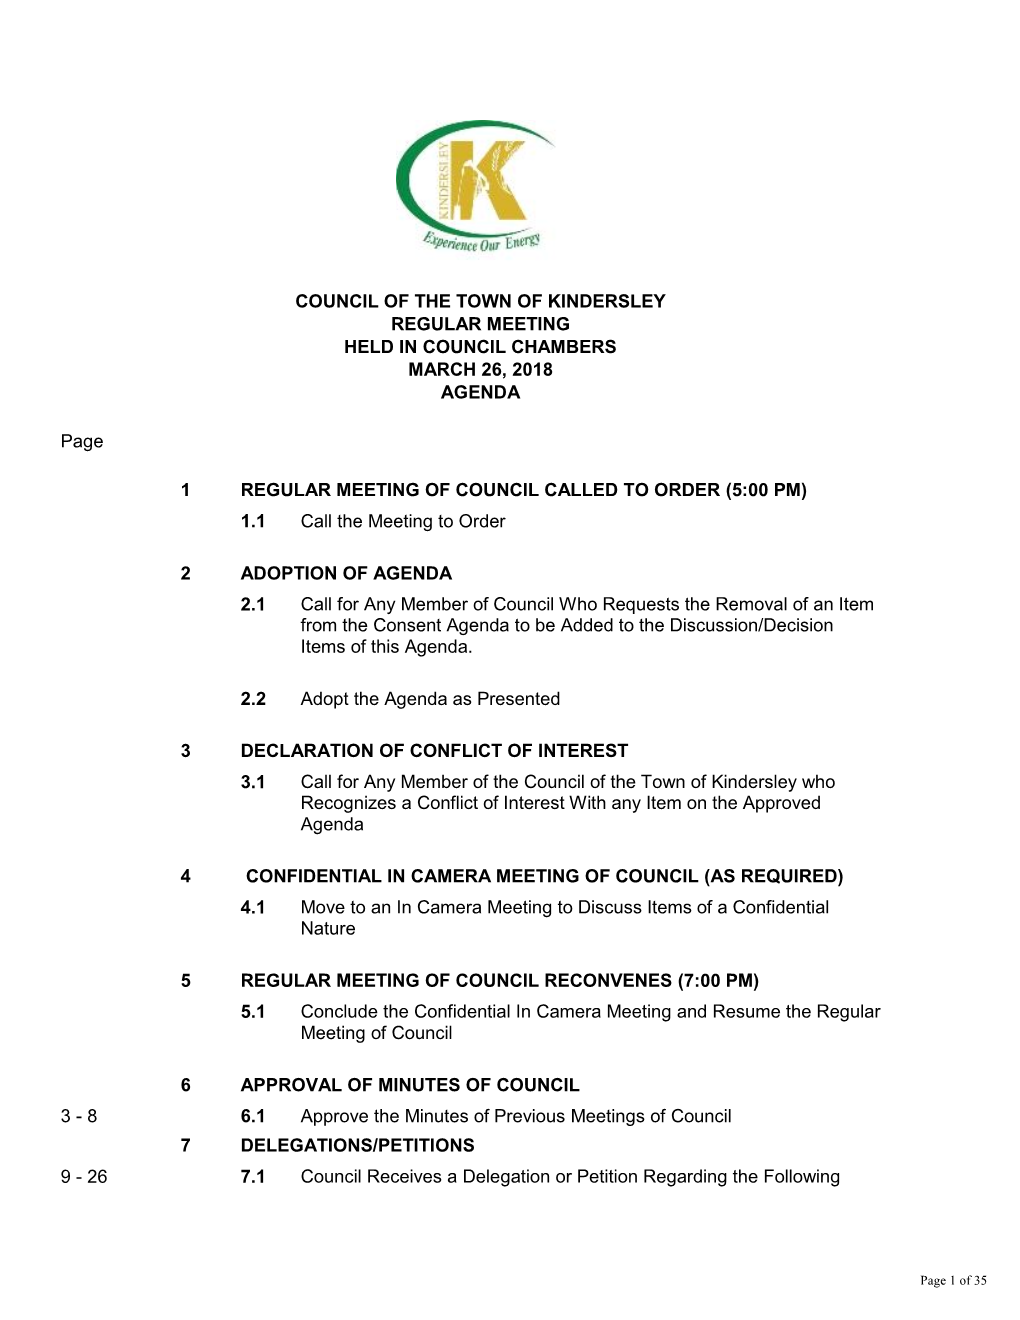 Council of the Town of Kindersley Regular Meeting Held in Council Chambers March 26, 2018 Agenda